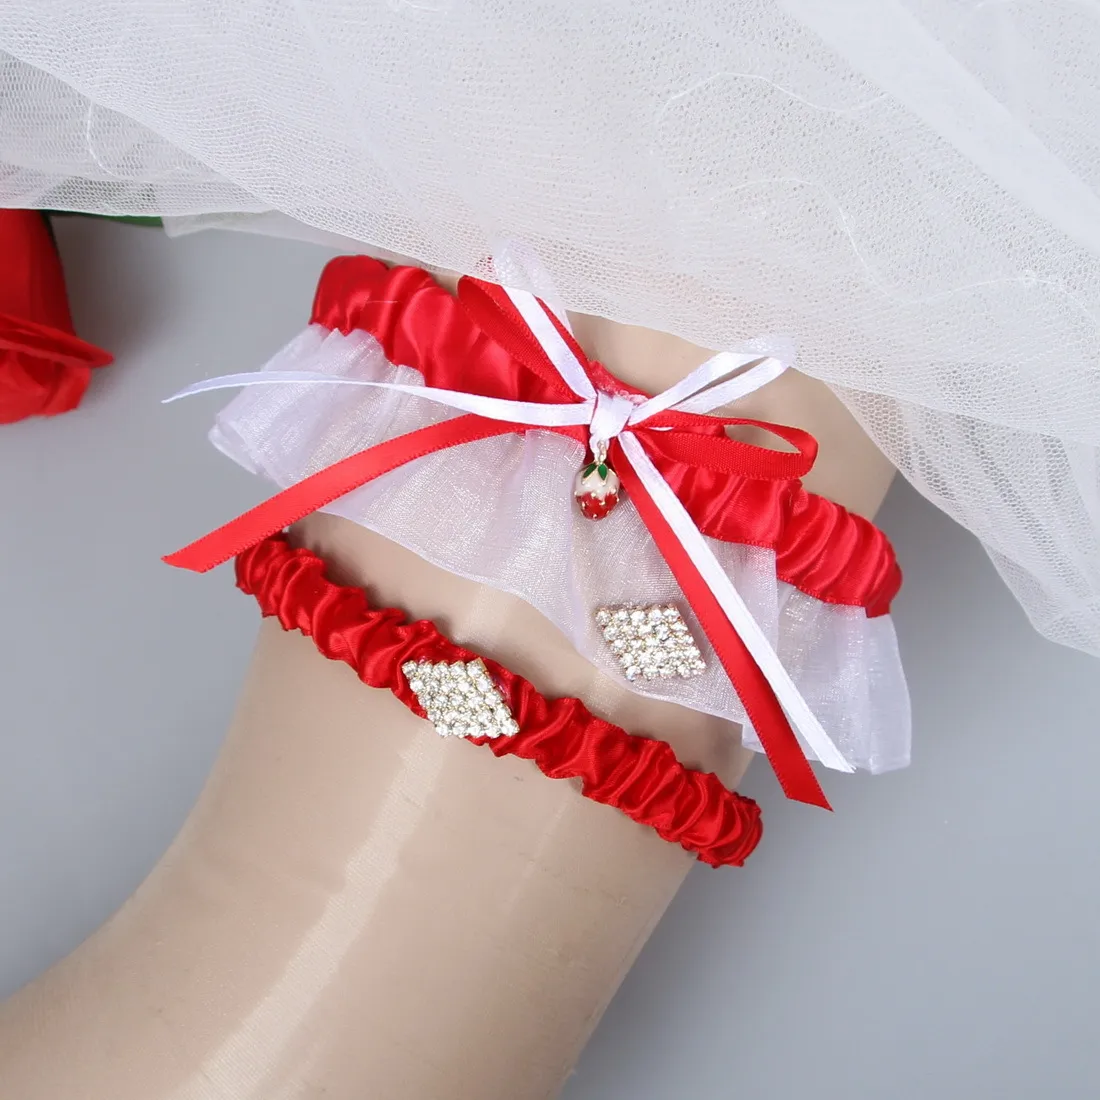 2 Pieces White Red Wedding Bridal Garters For Bride Set Wedding Bridal Leg Garters Cheap In Stock